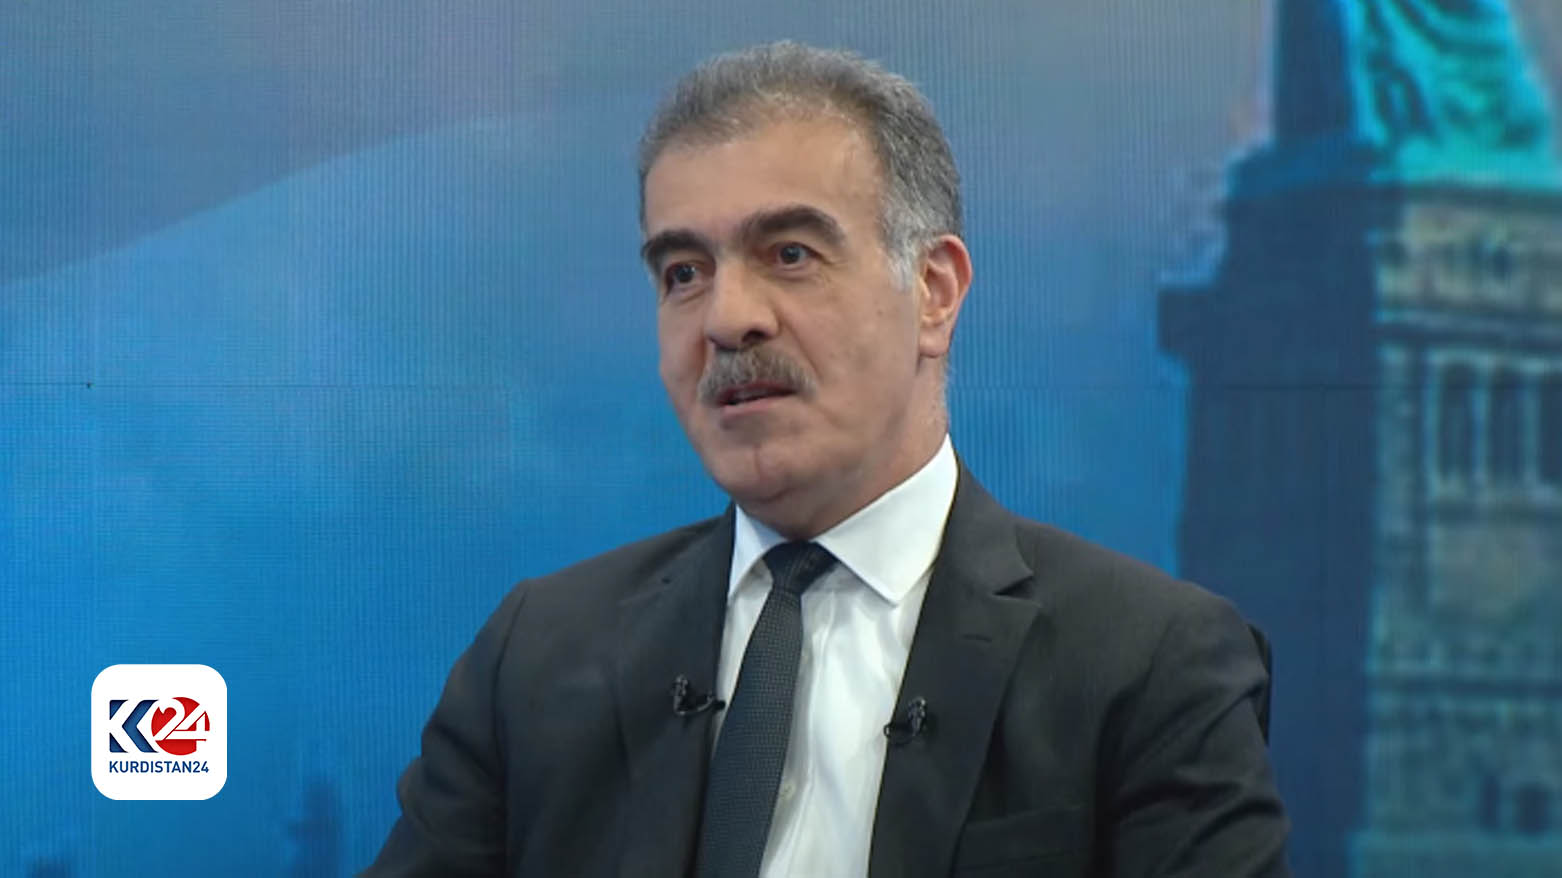 Safeen Dizayee, the head of the Kurdistan Regional Government's Foreign Relations Department spoke in "For Everyone" program. (Photo: Kurdistan 24)